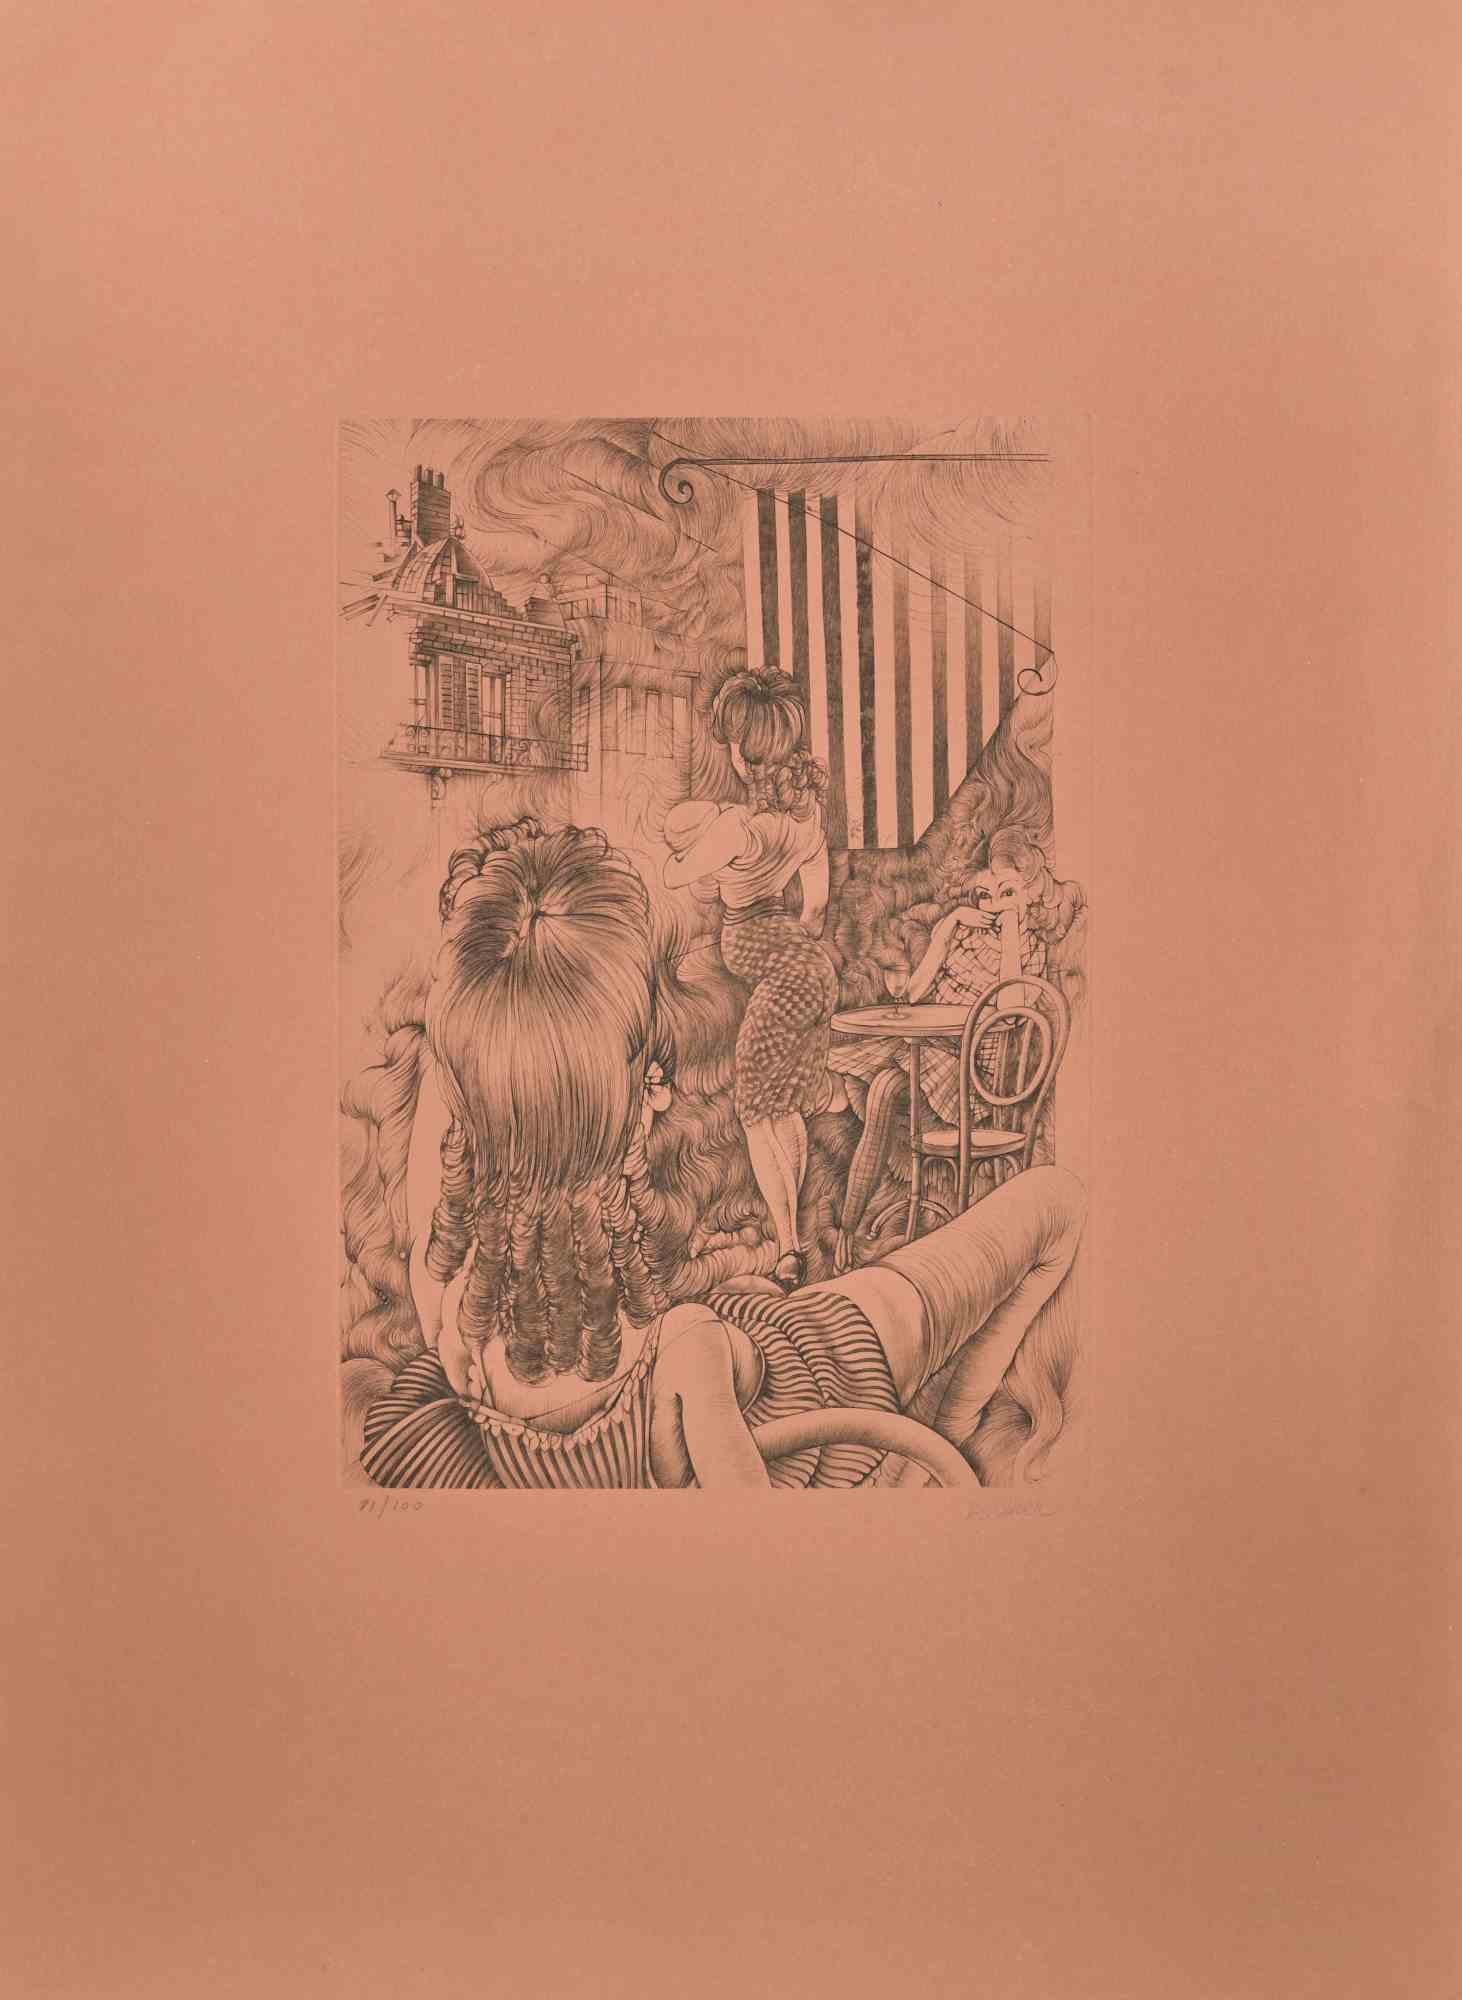 The fire of Marseille, 1971 realized by Hans Bellmer. 

Etching, Signed in pencil.

Limited edition of 100 copies numbered in pencil

Richard de Bas paper tinted brick red

56 x 78 cm

REFERENCES : Lithograph referenced in the Flahutez catalog